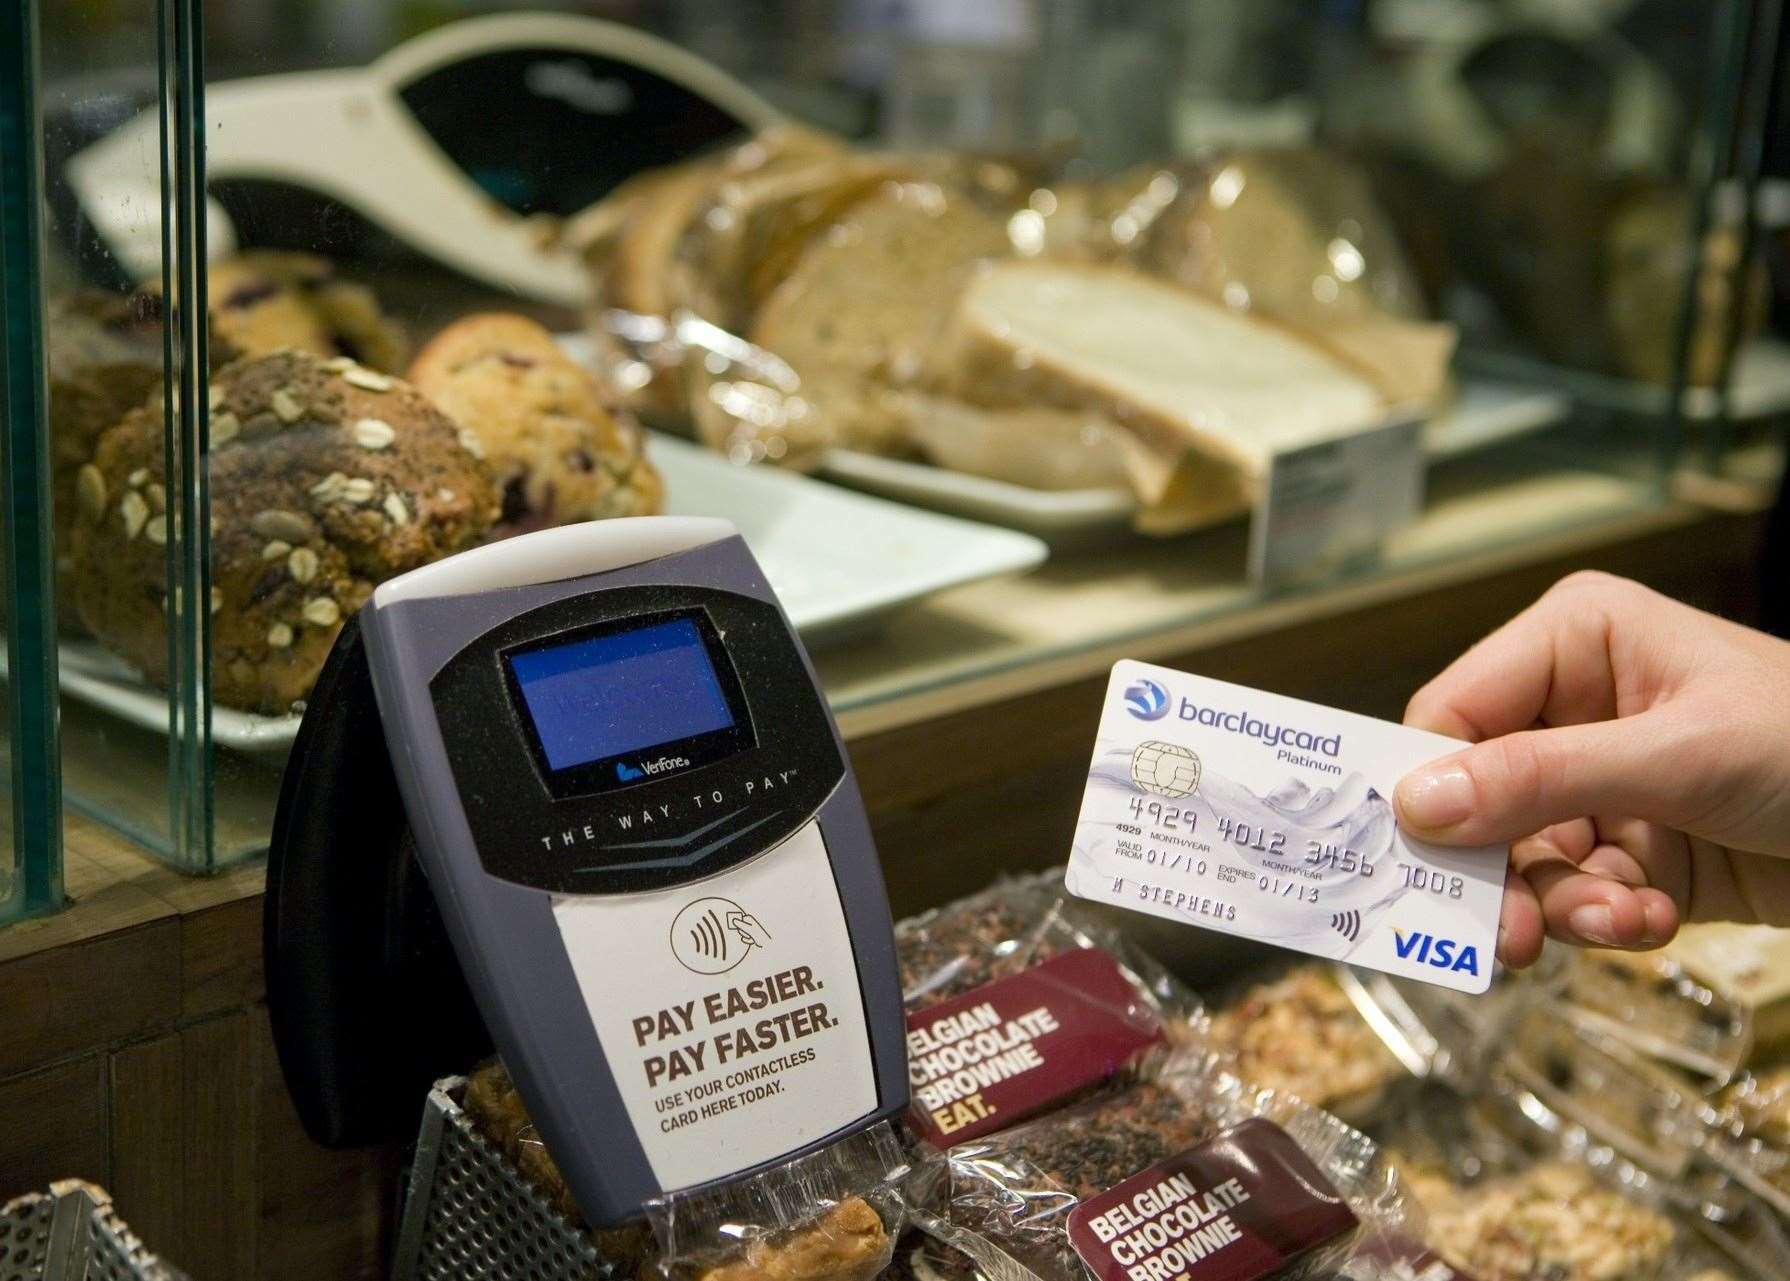 People will be able to spend £45 on contactless payments from April 1.